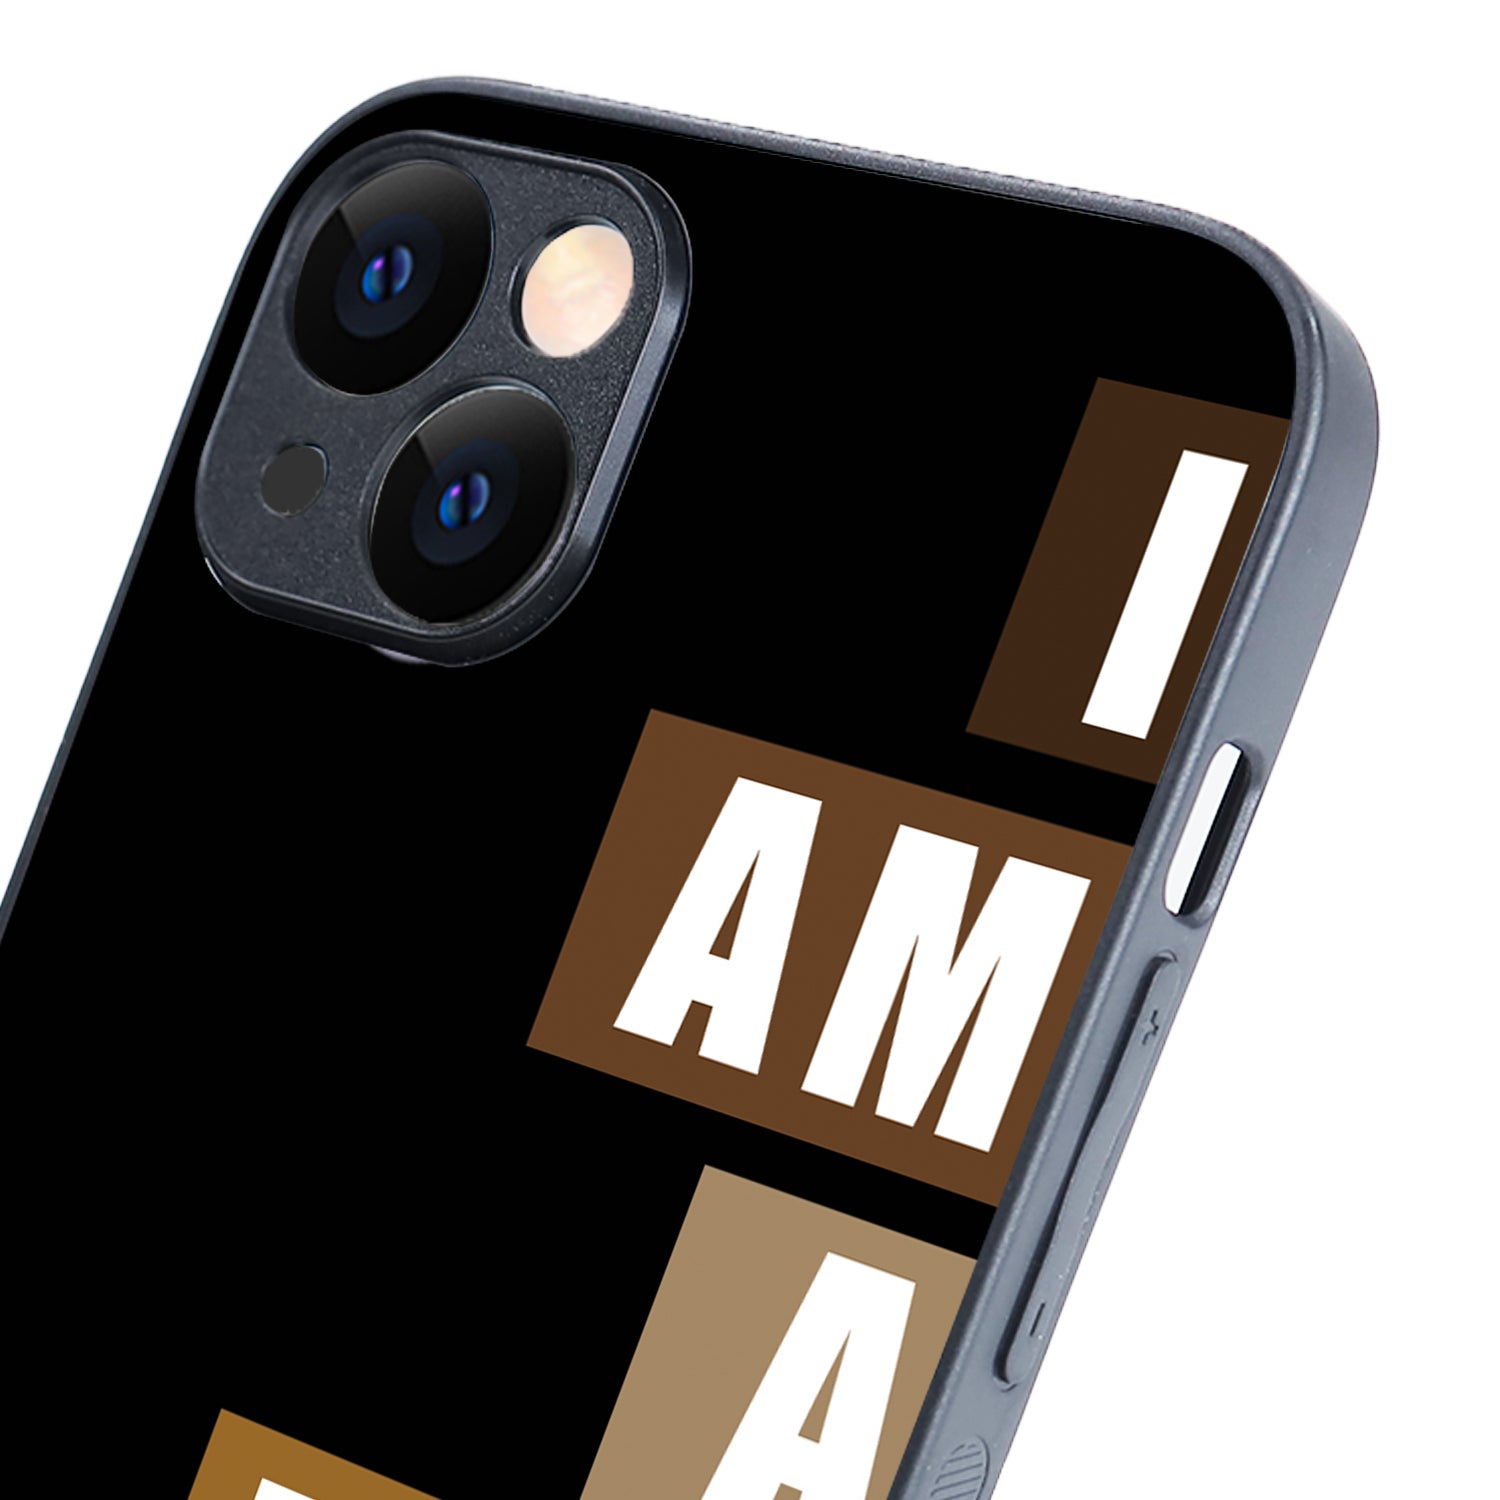 I Am A Man Of Words Motivational Quotes iPhone 14 Plus Case